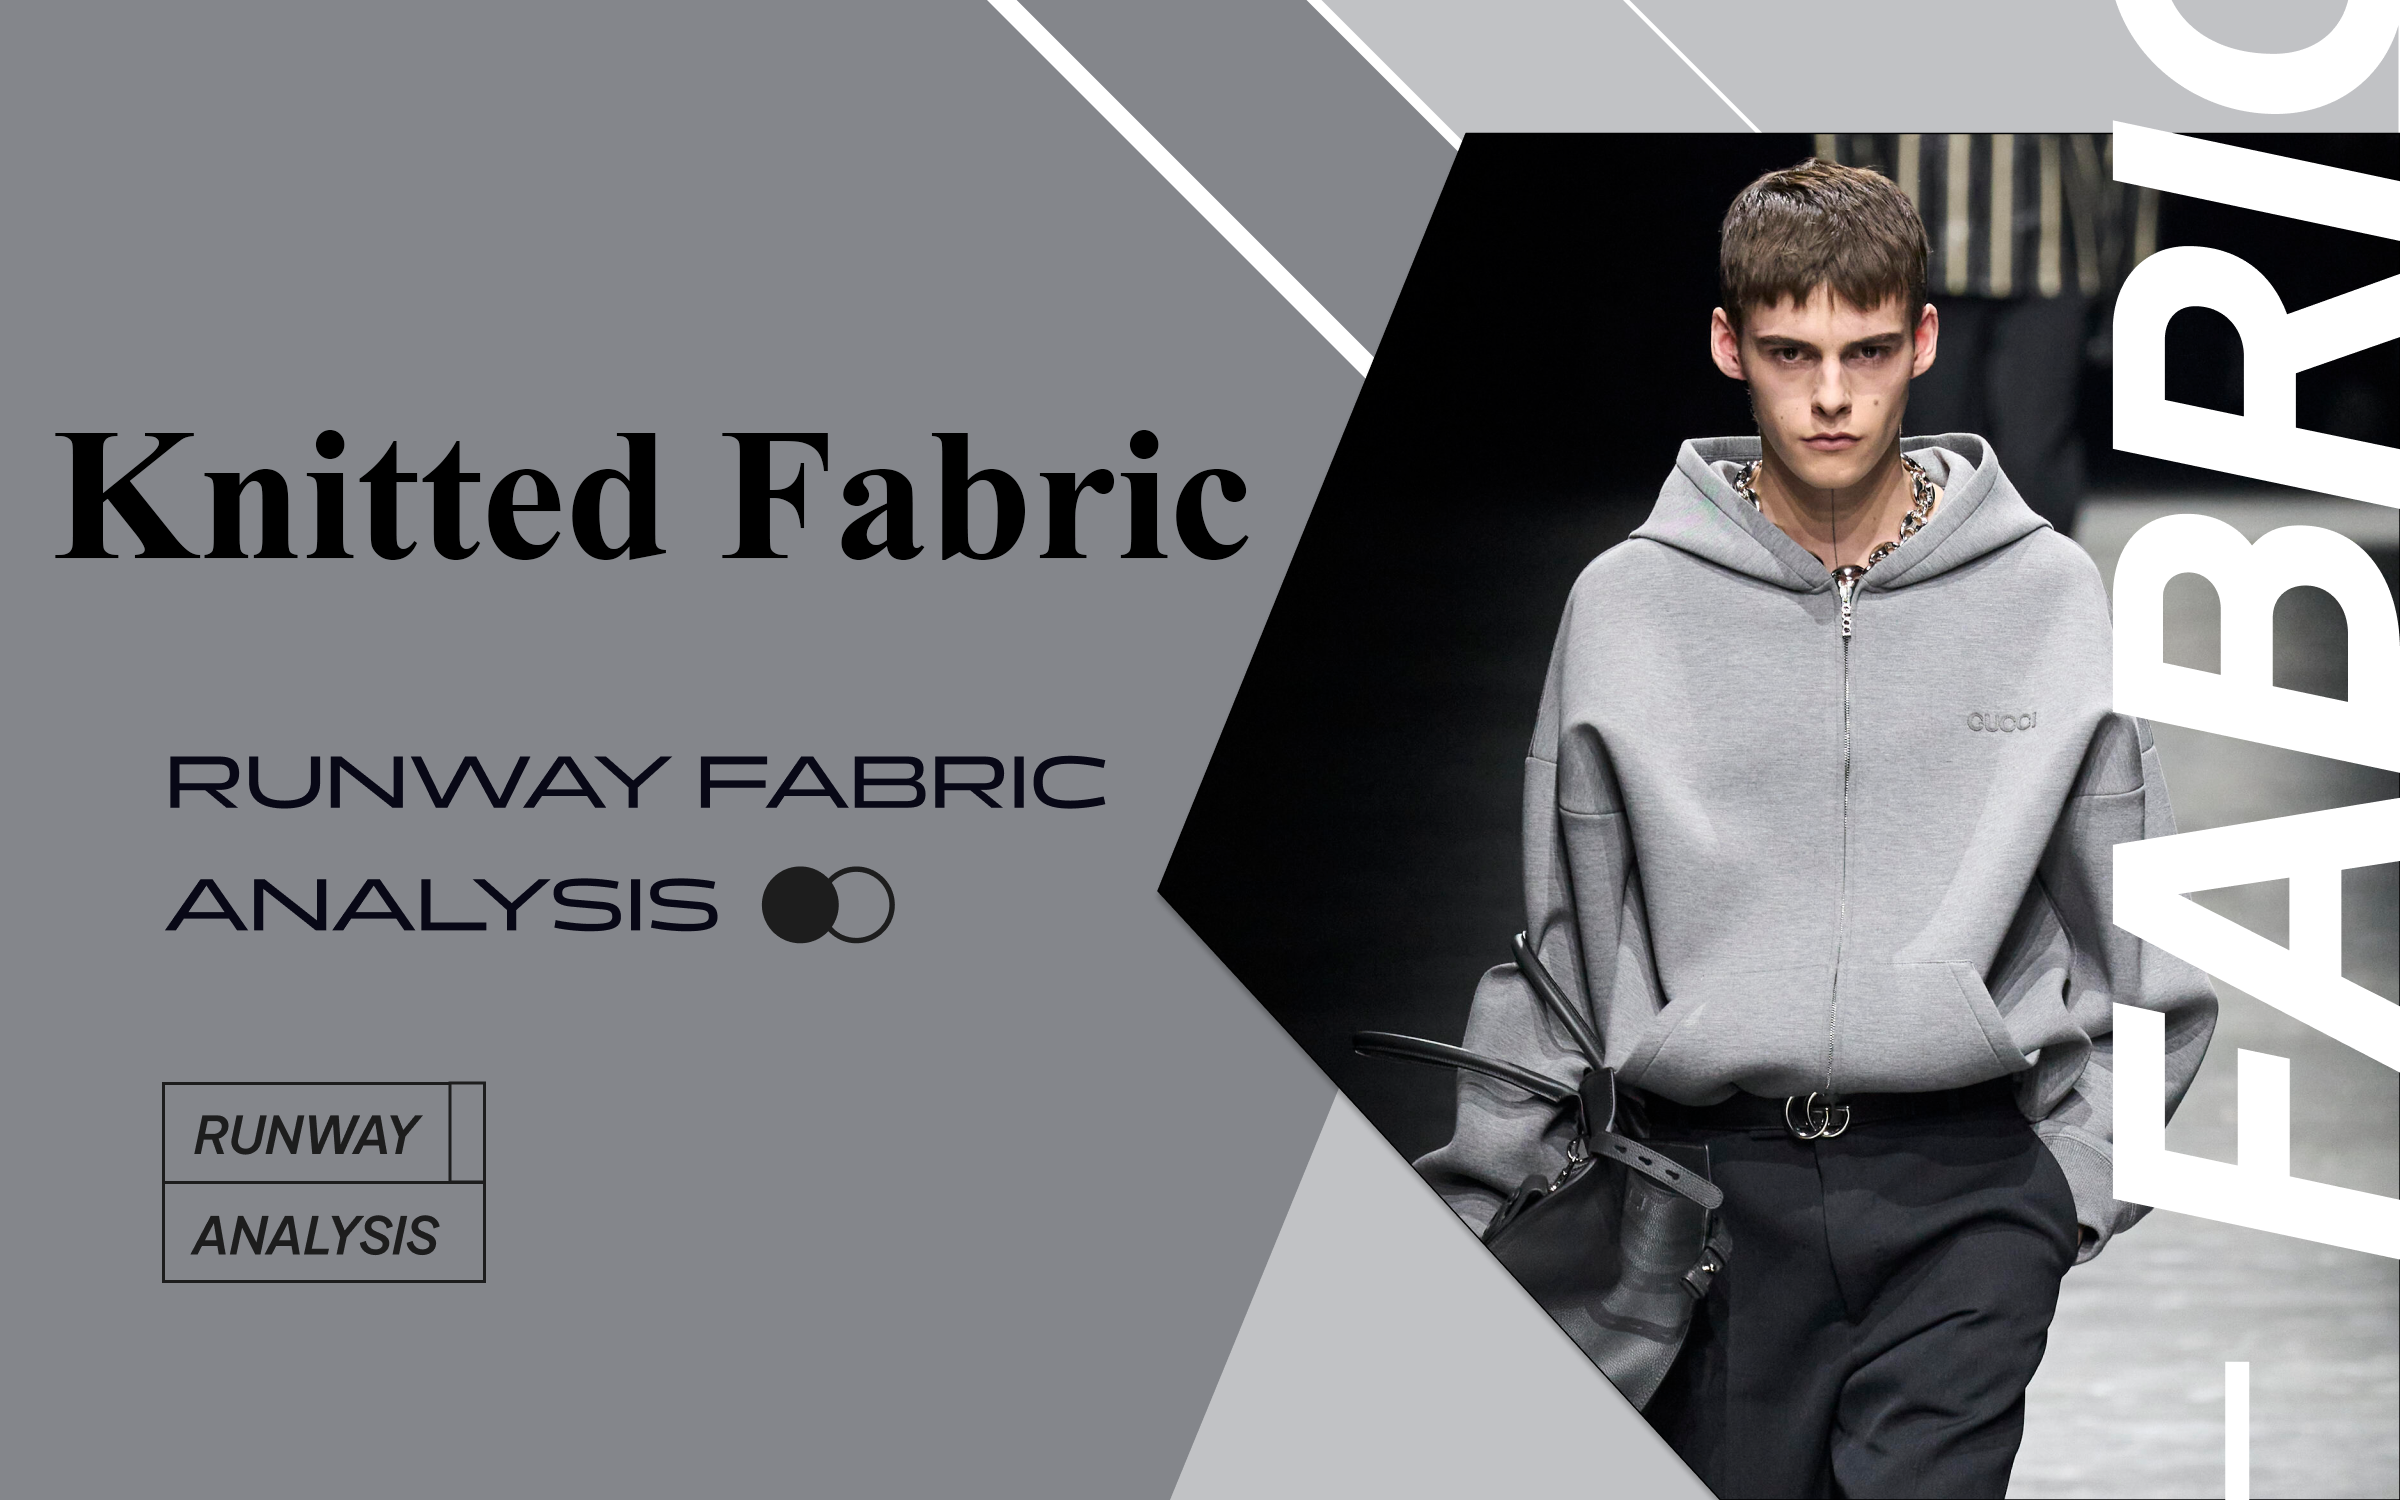 Knitted Fabric -- The Comprehensive Analysis of Men's Runway